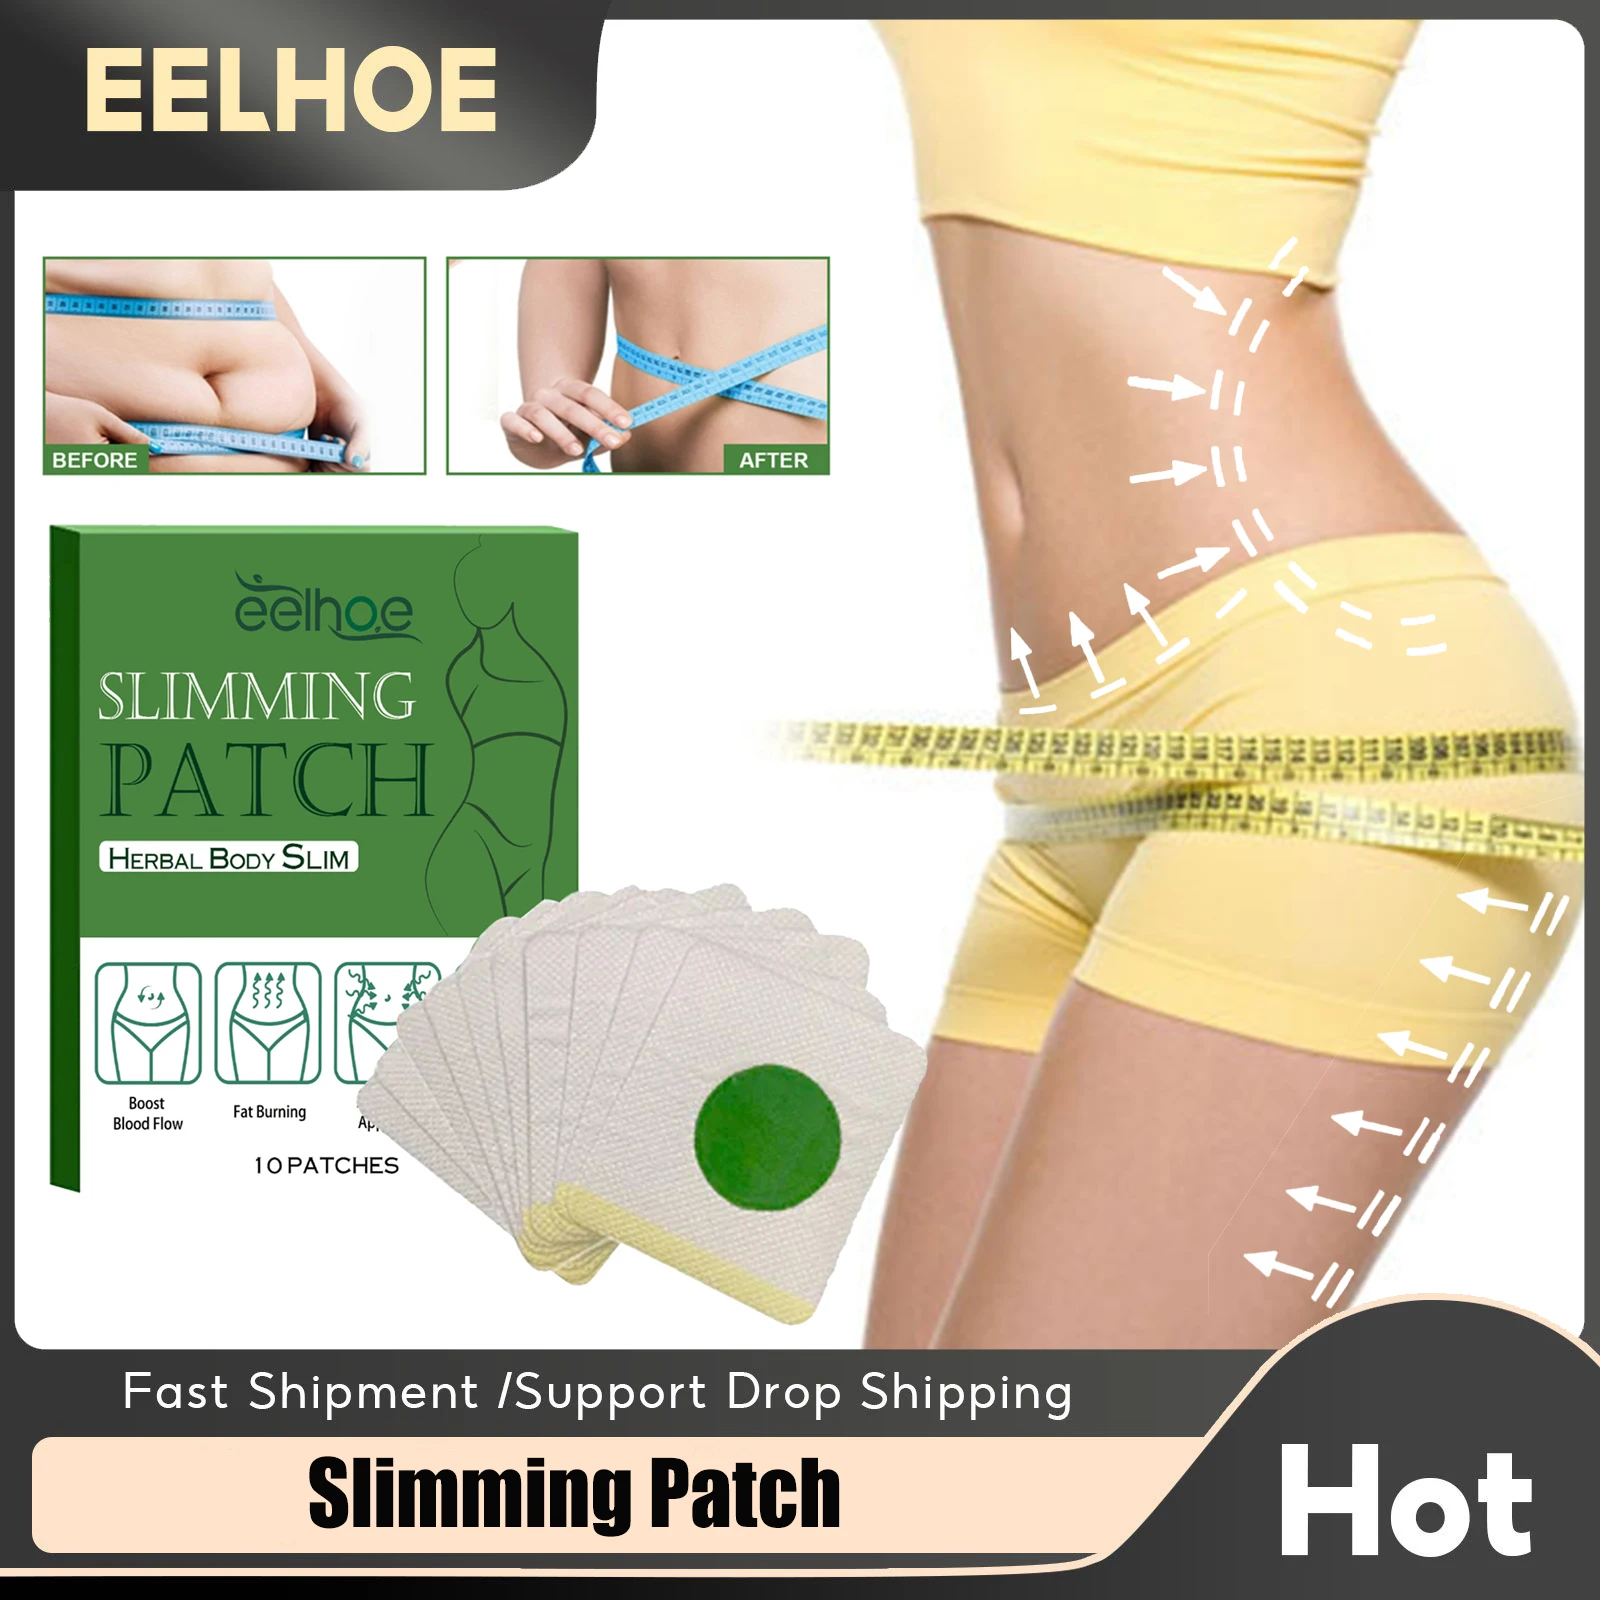 

Slimming Patch Belly Sticker Shaping Firming Waist Slim Fat Burning Weight Loss Products Anti Cellulite Detox Herbal Navel Patch